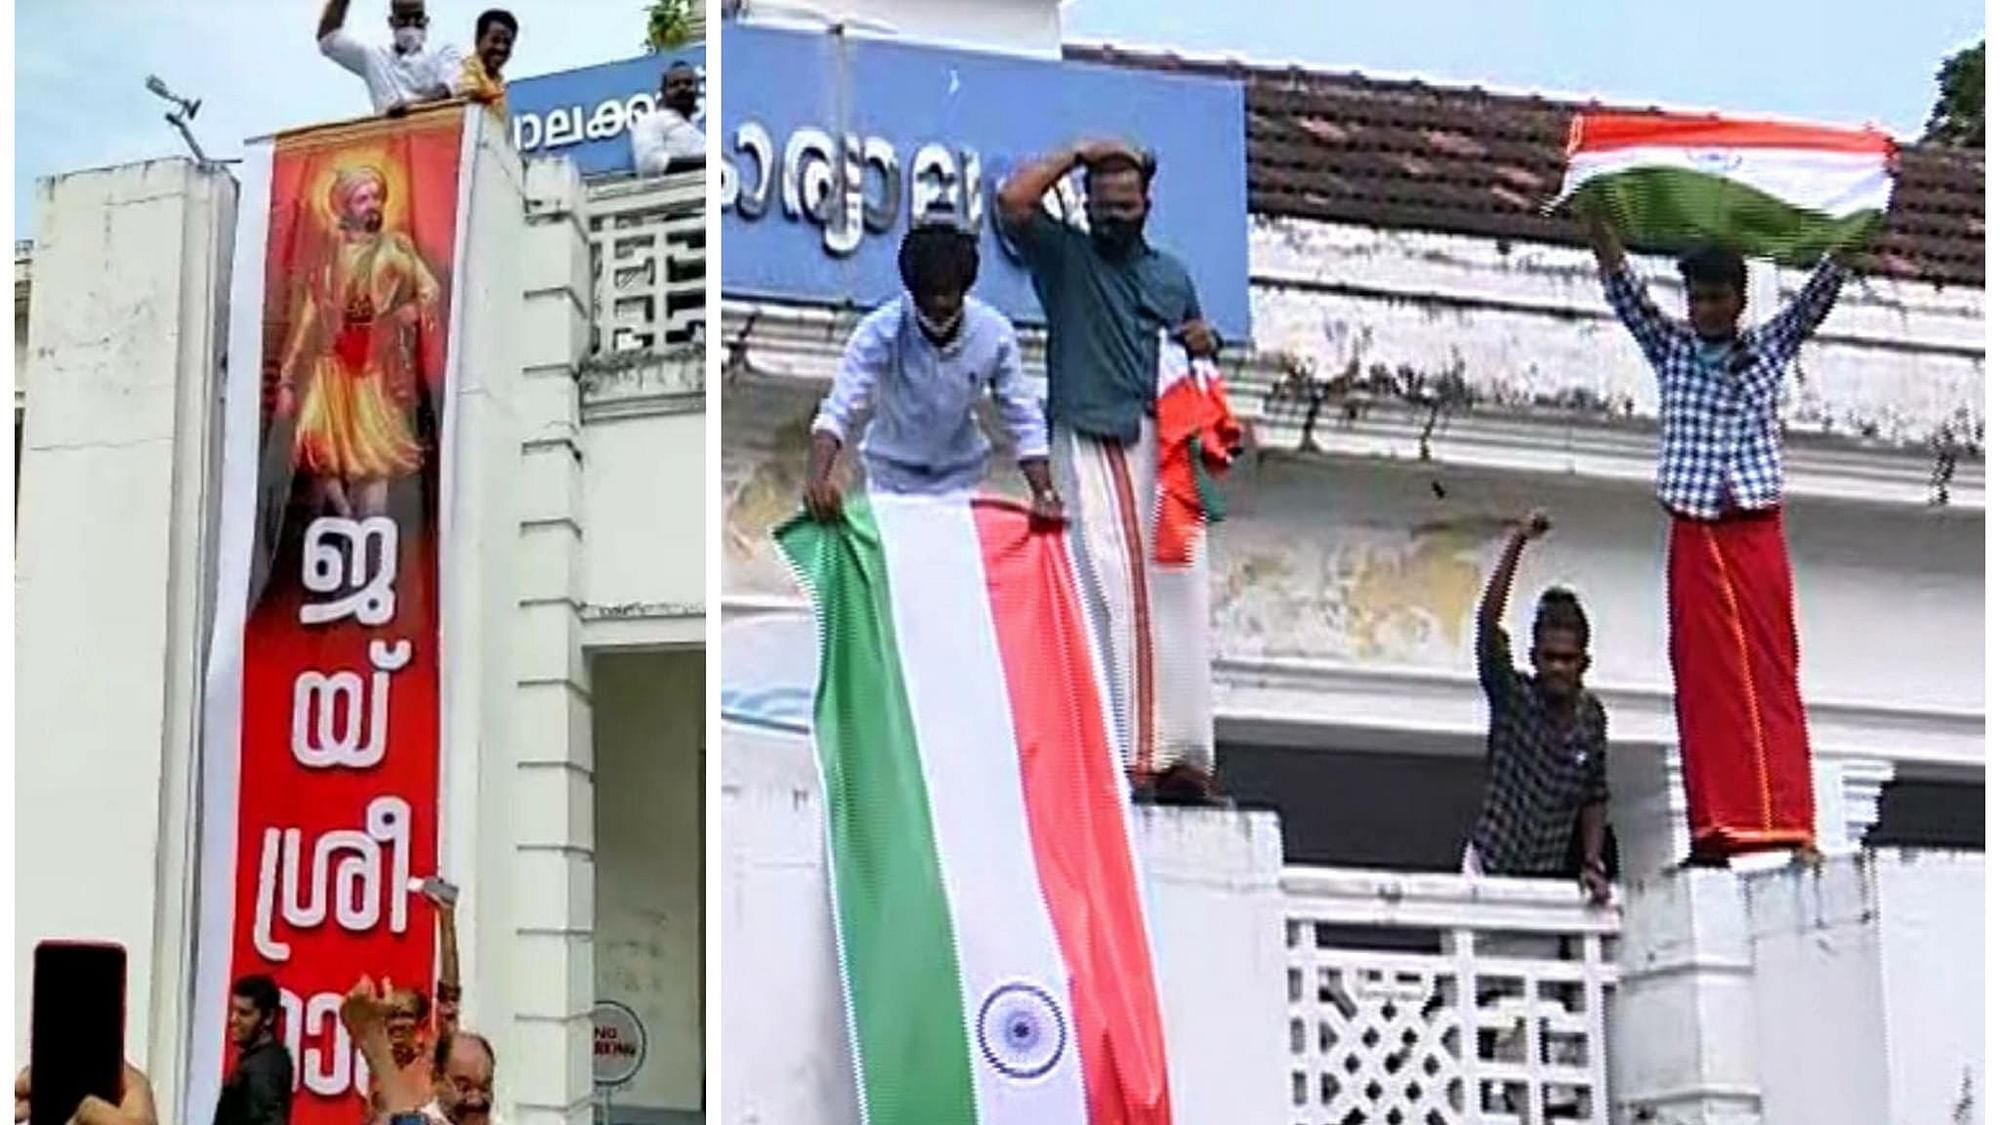 Just a day after BJP activists rolled down a flex of ‘Jai Sreeram’ from the the Palakkad municipal office building, a group of DYFI activists on Friday scaled atop and rolled down the national flag.